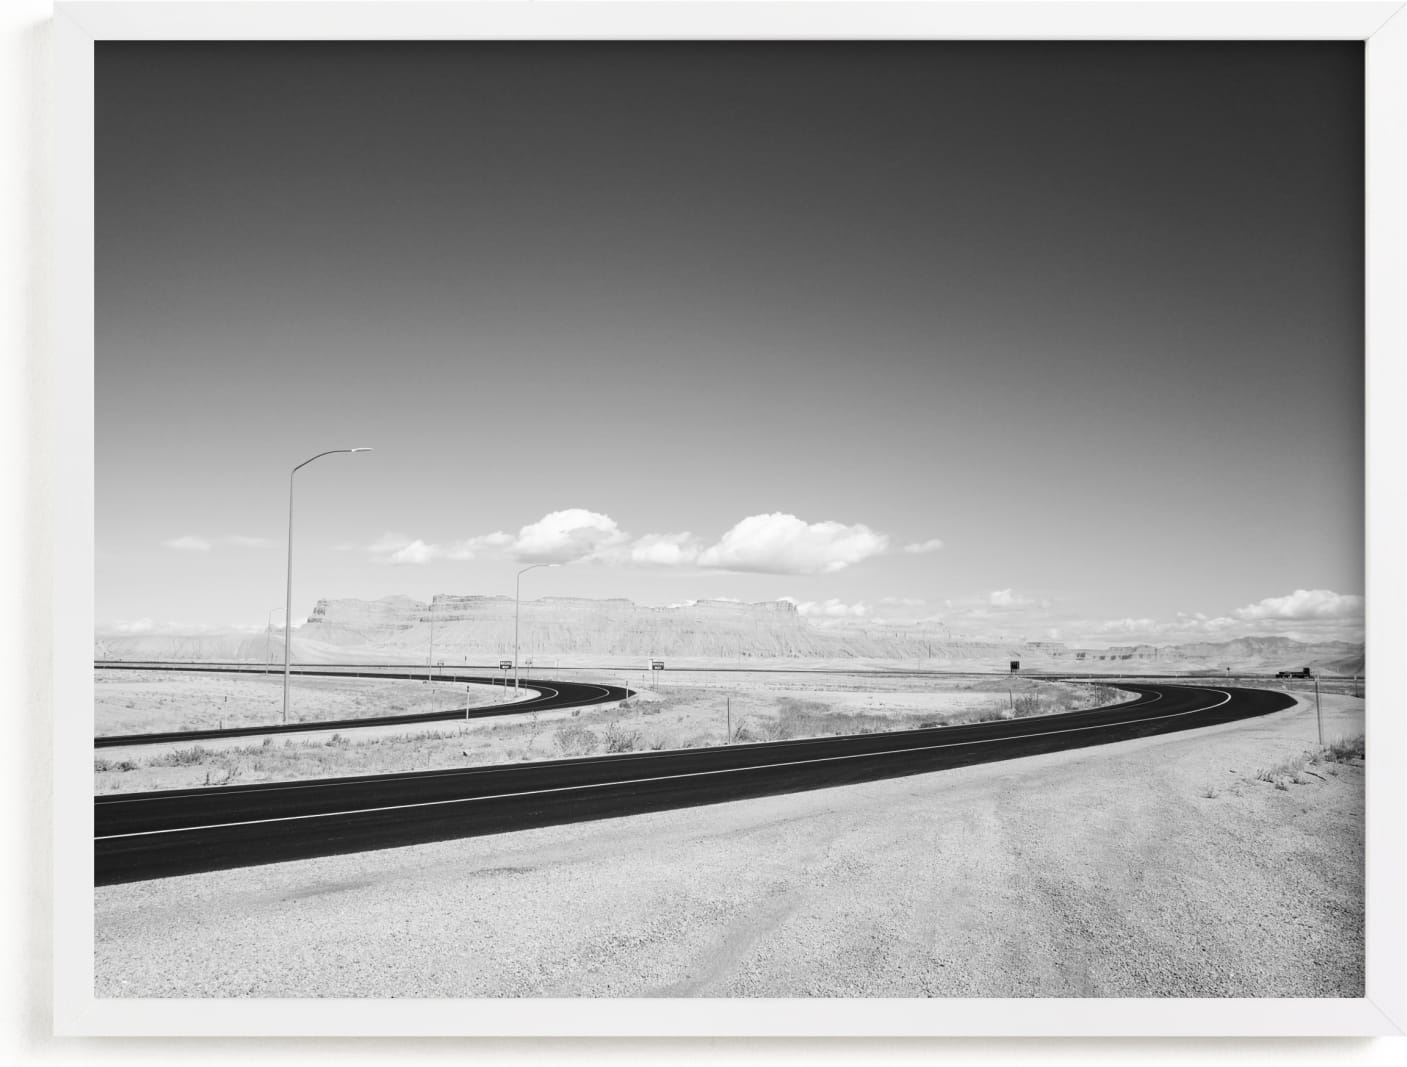 This is a black and white art by Tania Medeiros called Desert Route.